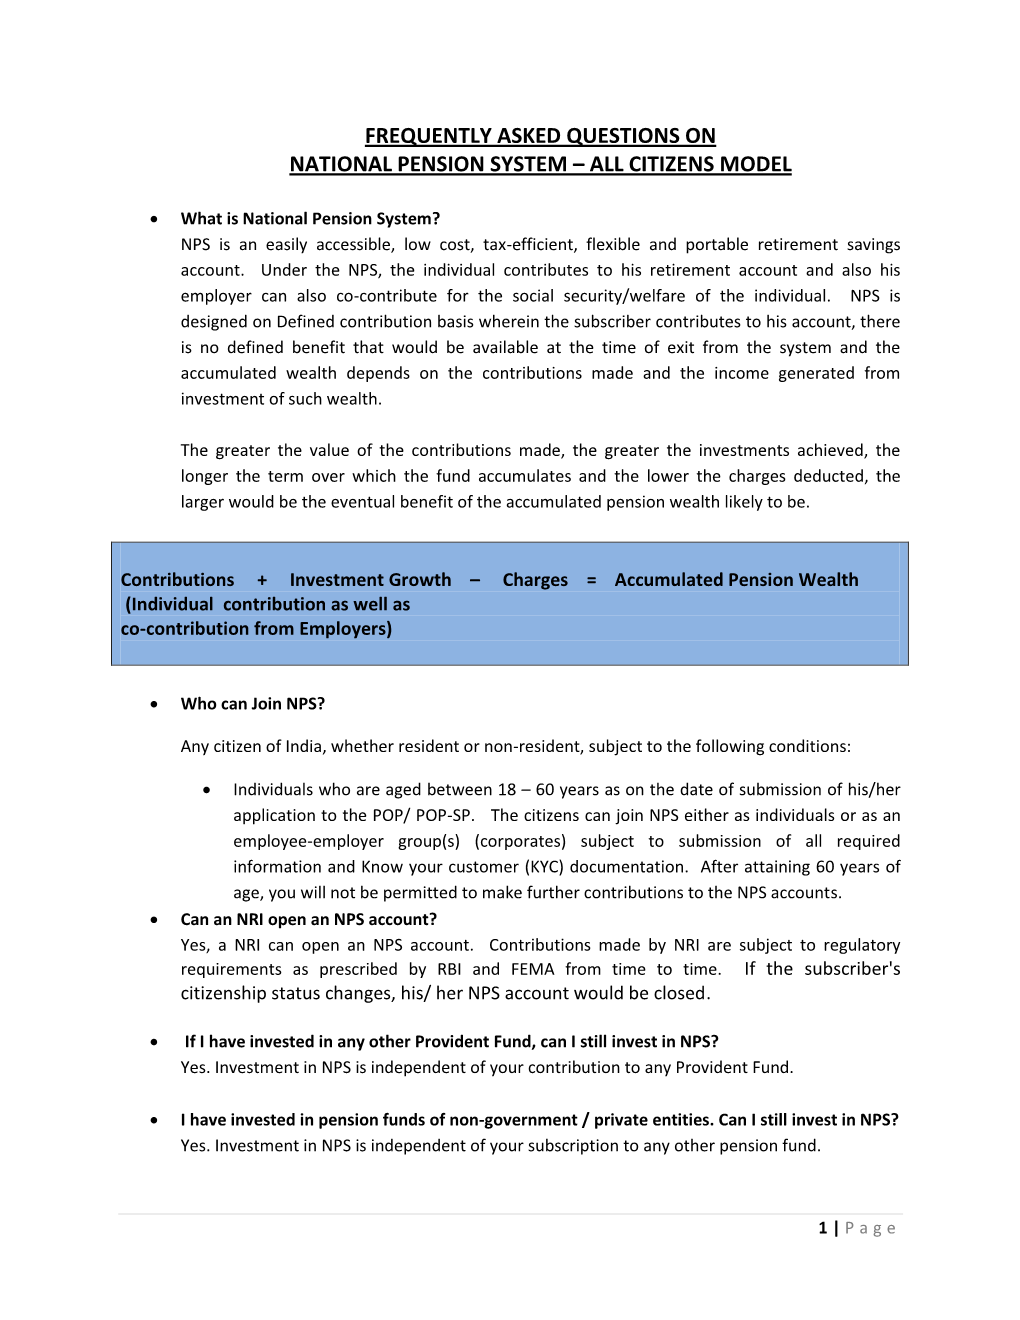 Frequently Asked Questions on National Pension System – All Citizens Model